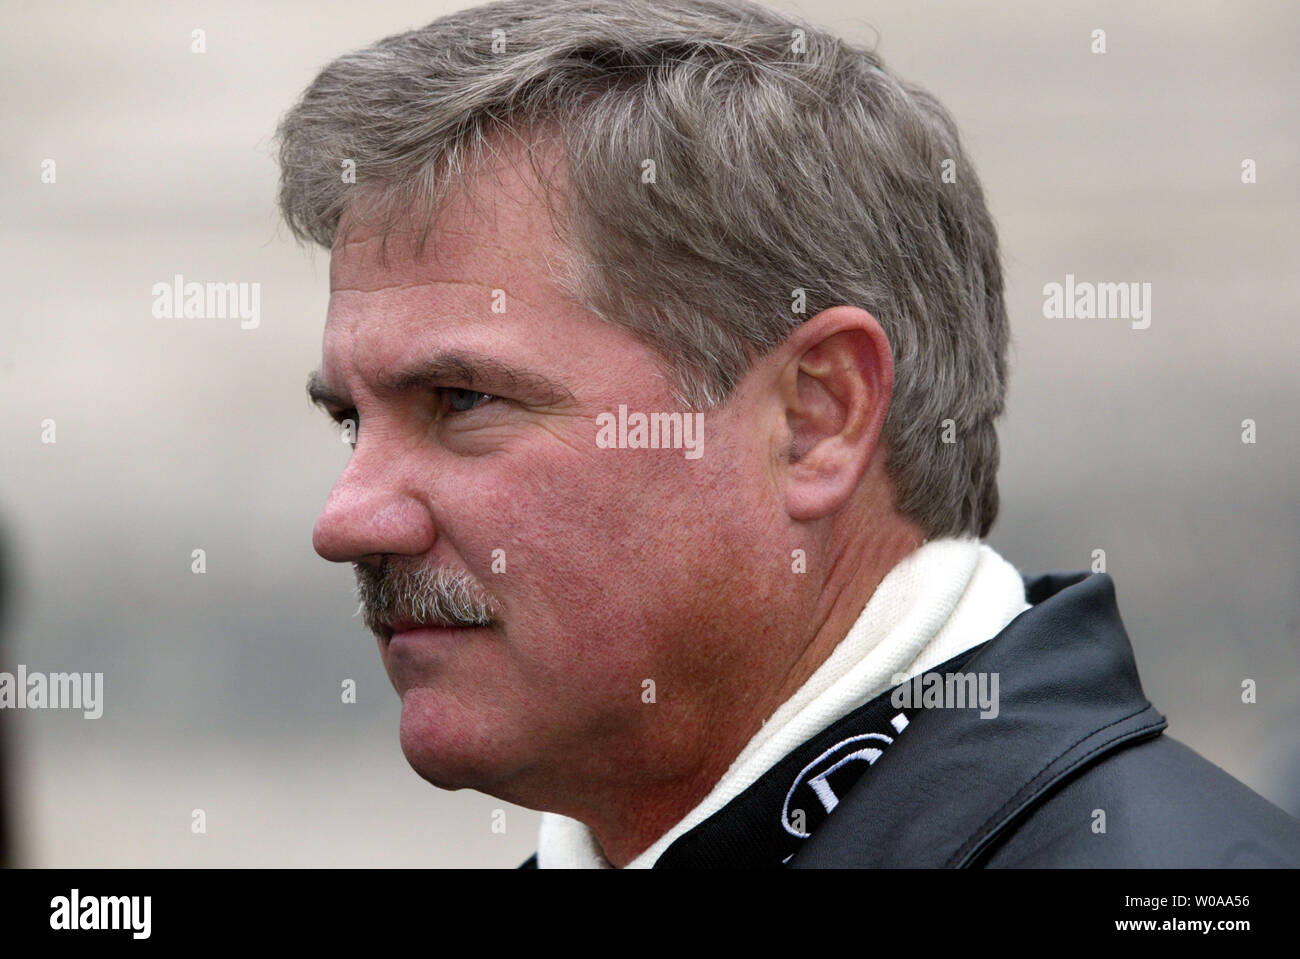 NASCAR driver Terry Labonte awaits the start of the Food City 500 at the Bristol Motor Speedway in Bristol, TN on March 26, 2006. (UPI Photo/Nell Redmond) Stock Photo